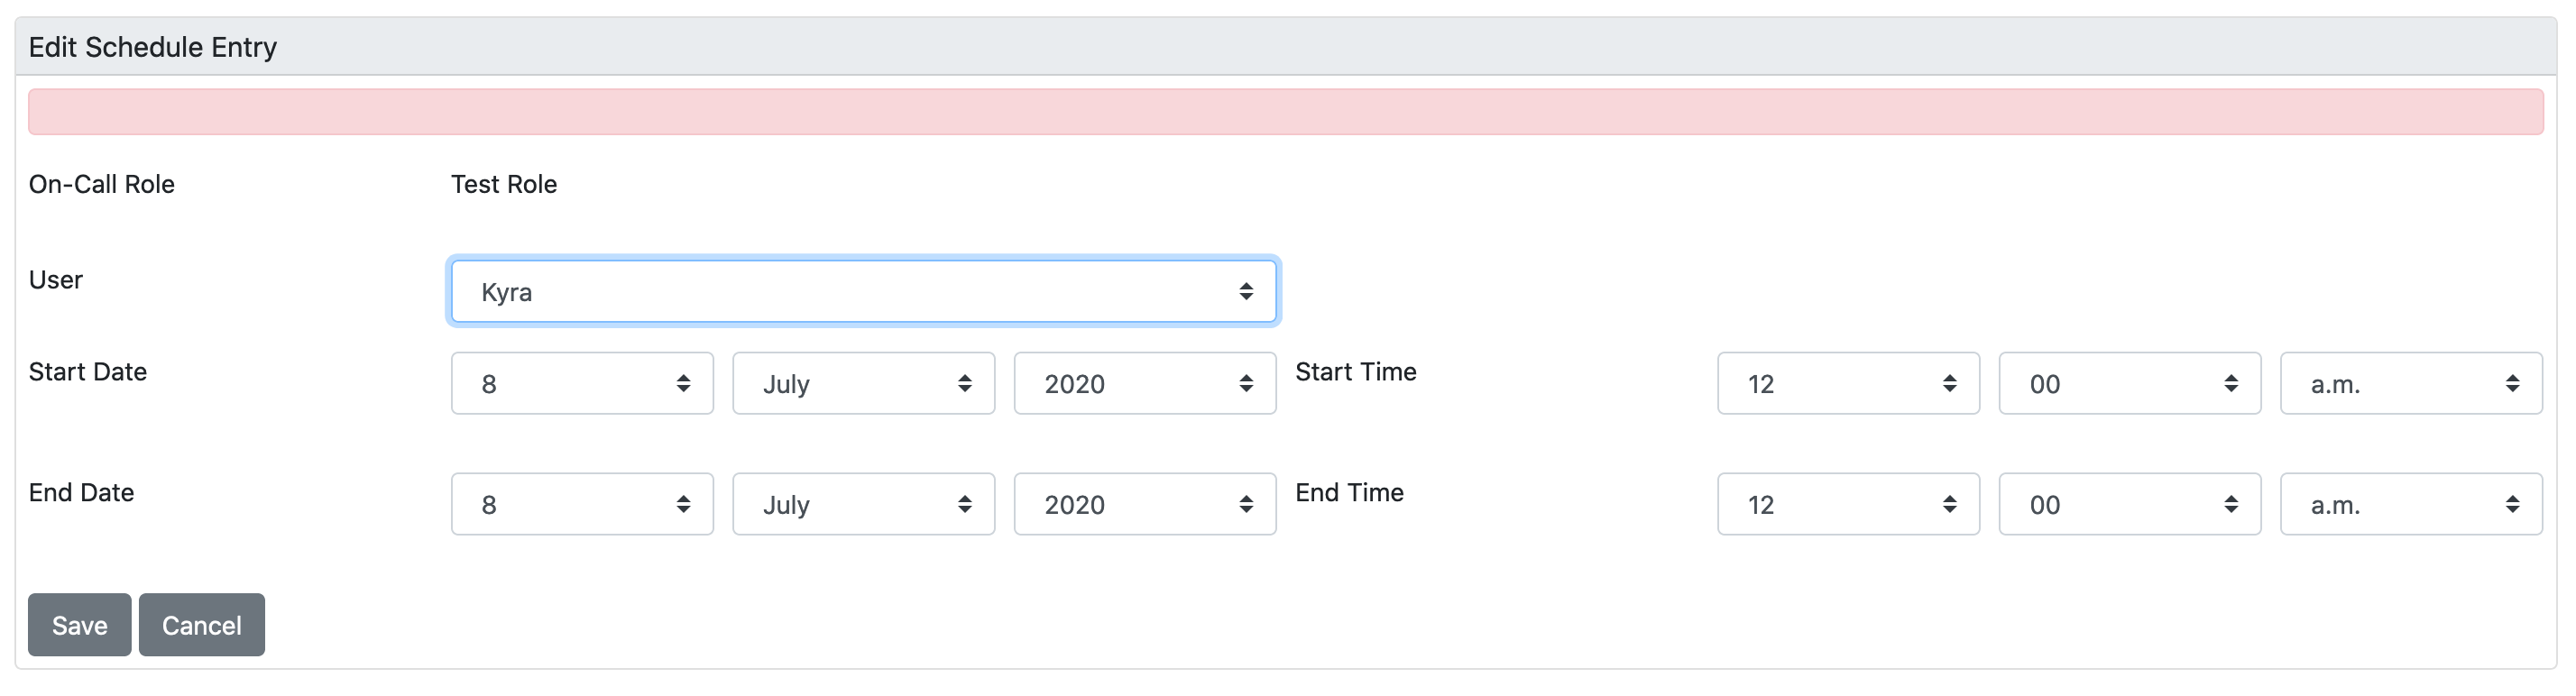 Example on-call schedule settings for a single user